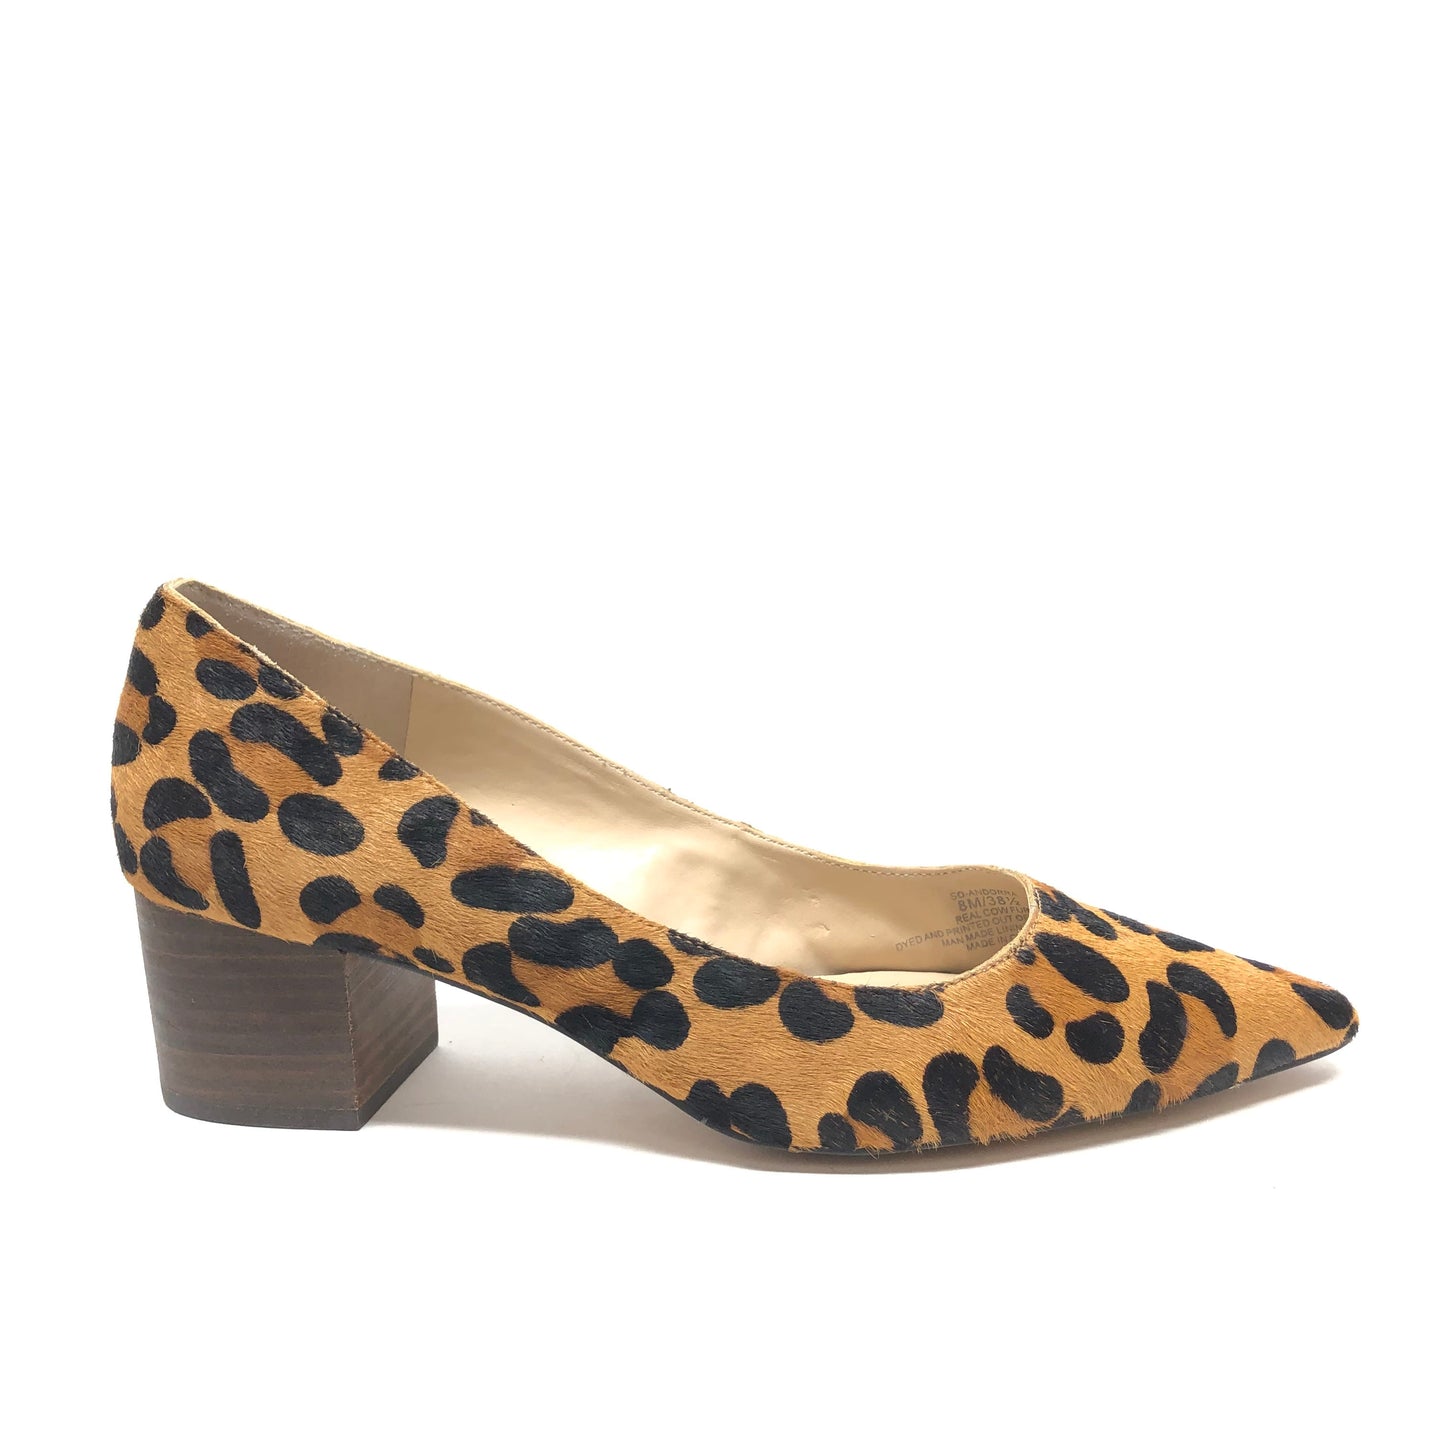 Leopard Print Shoes Heels Block Sole Society, Size 8